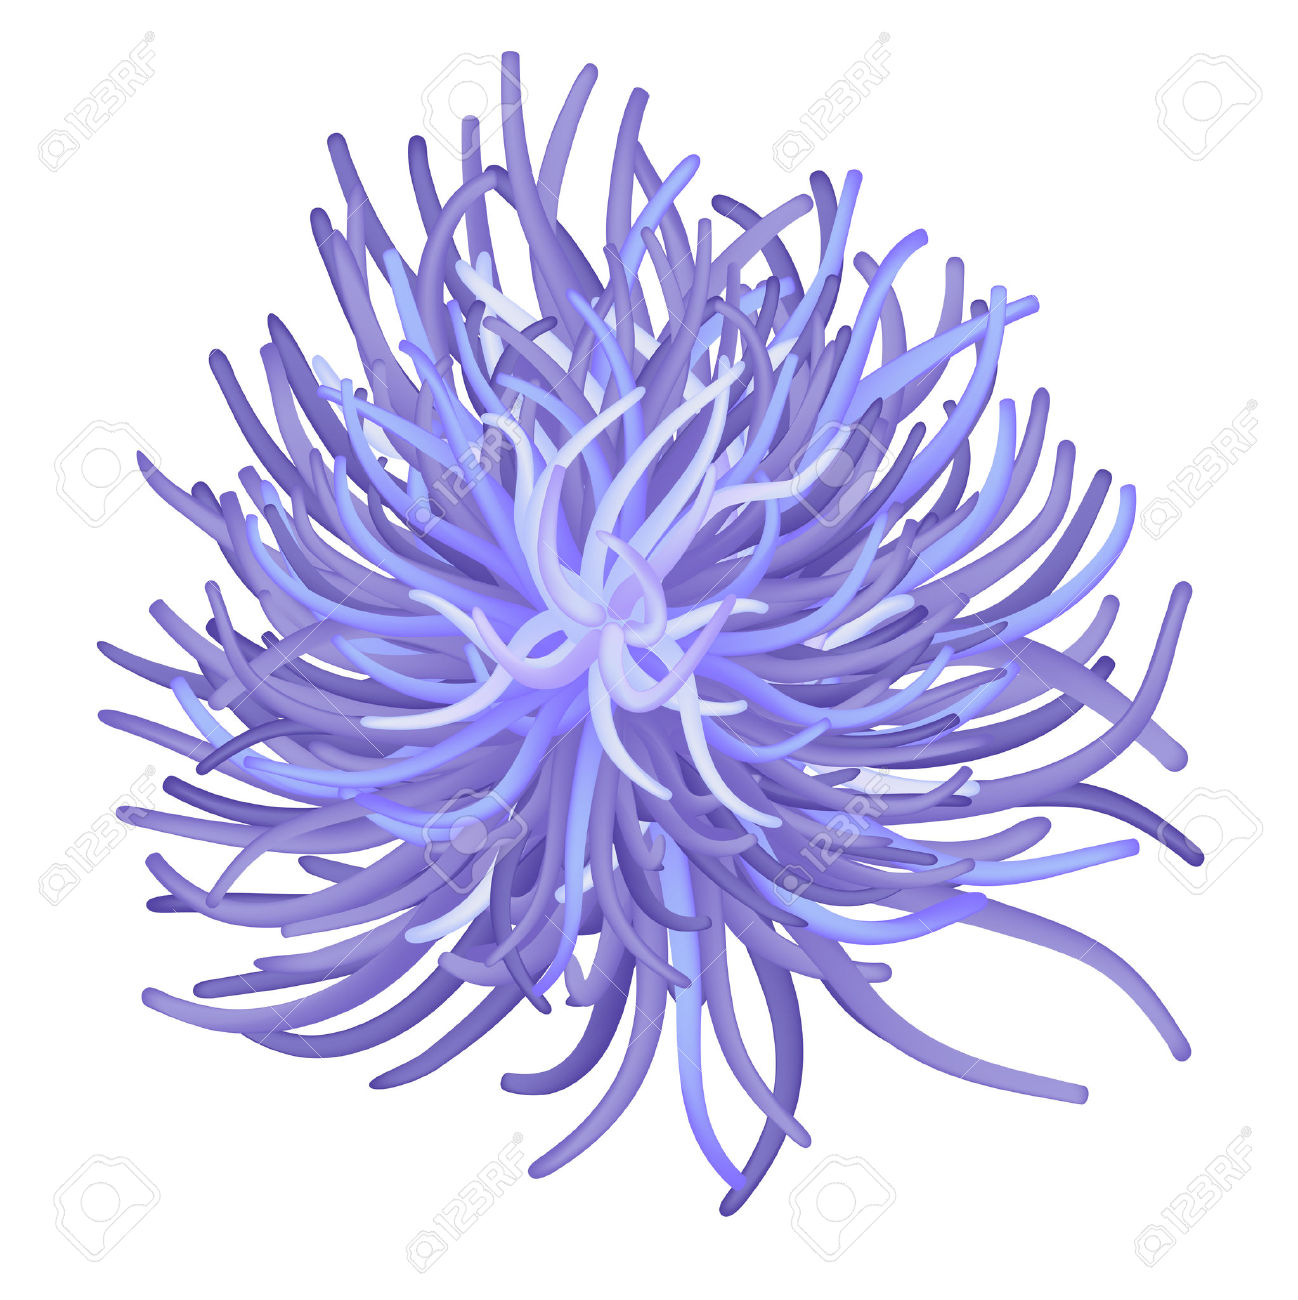 Sea Anemone clipart #18, Download drawings